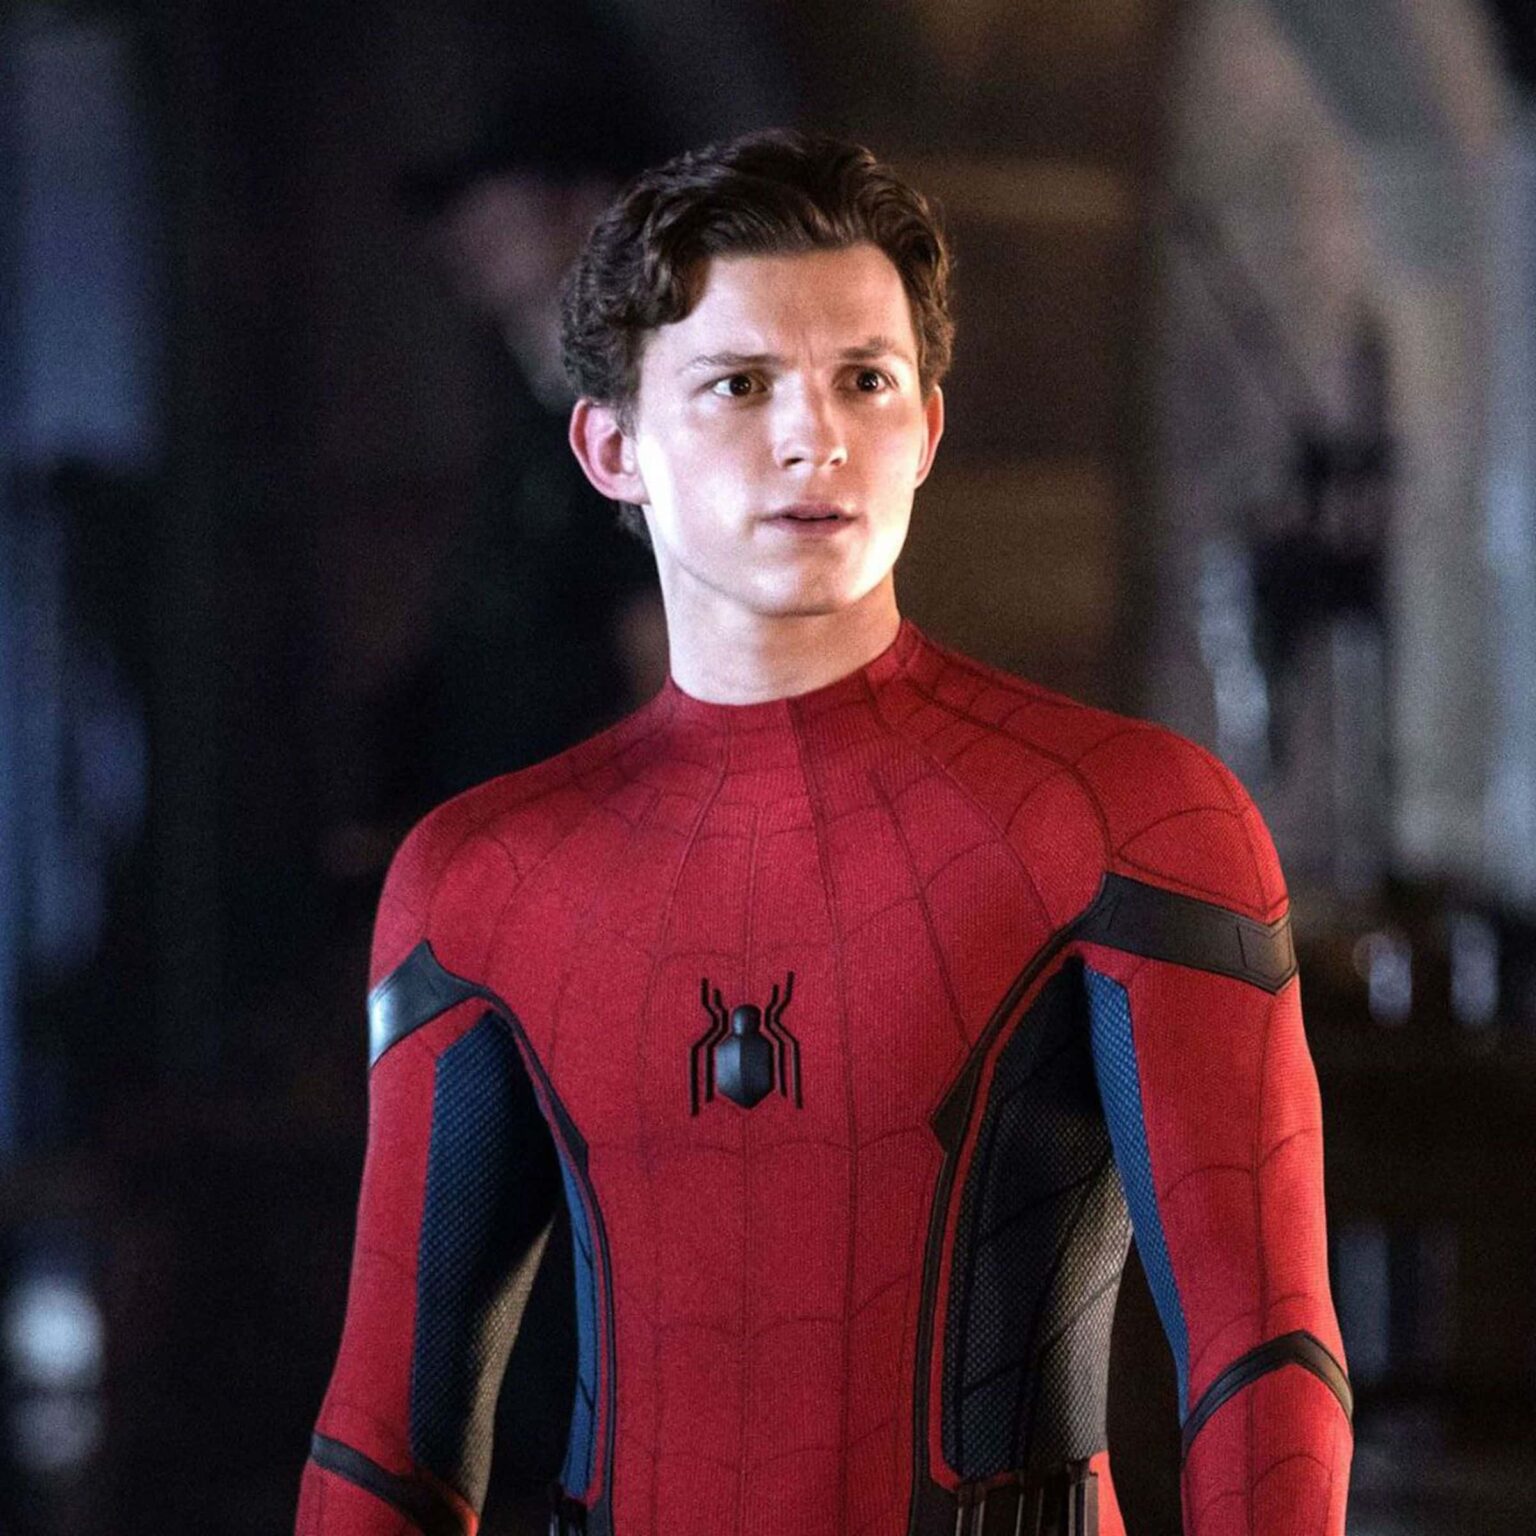 In a new interview, Tom Holland shared some revealing details about the upcoming 'Spider-Man: No Way Home'. Read what the actor said about the new film.